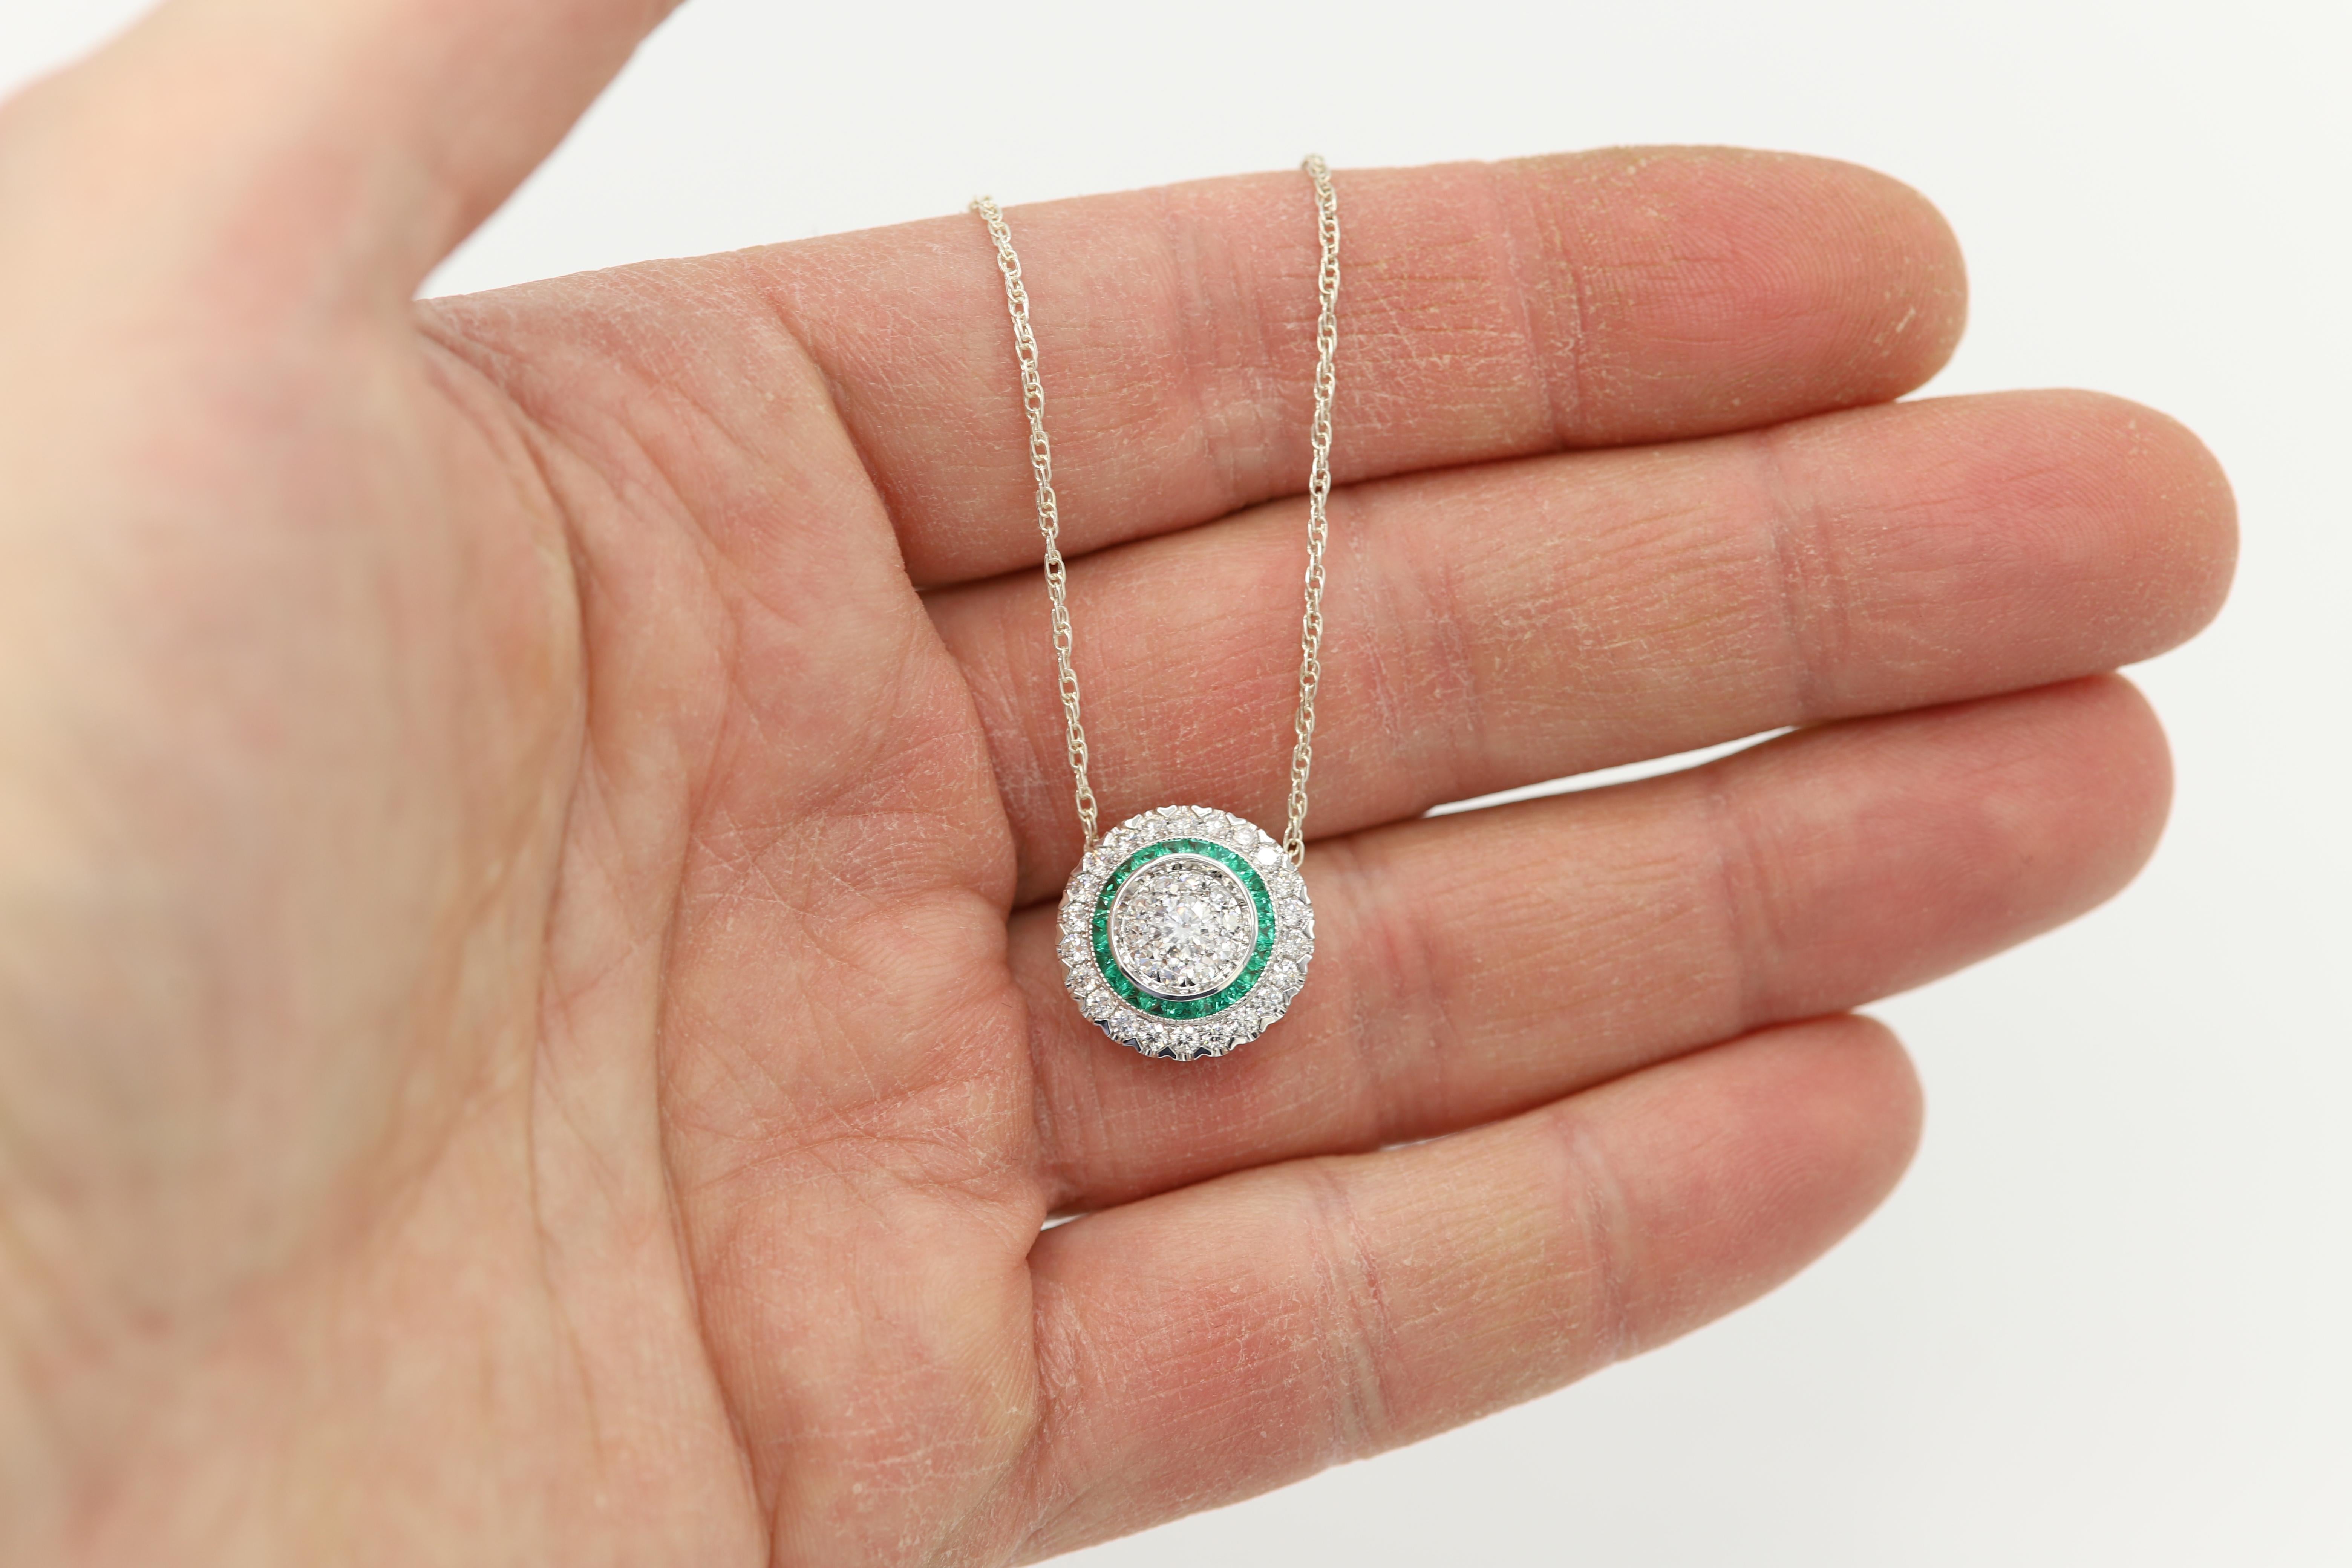 Brilliant Art Deco Style Pendant. 18k White Gold 4.50 grams. Total all Diamonds 0.97 carat (center stones are a super cluster of diamonds that look as a single stone to the eye) GH-SI. Emerald total 0.37 carat.  diameter size approx 17 mm or 5/8